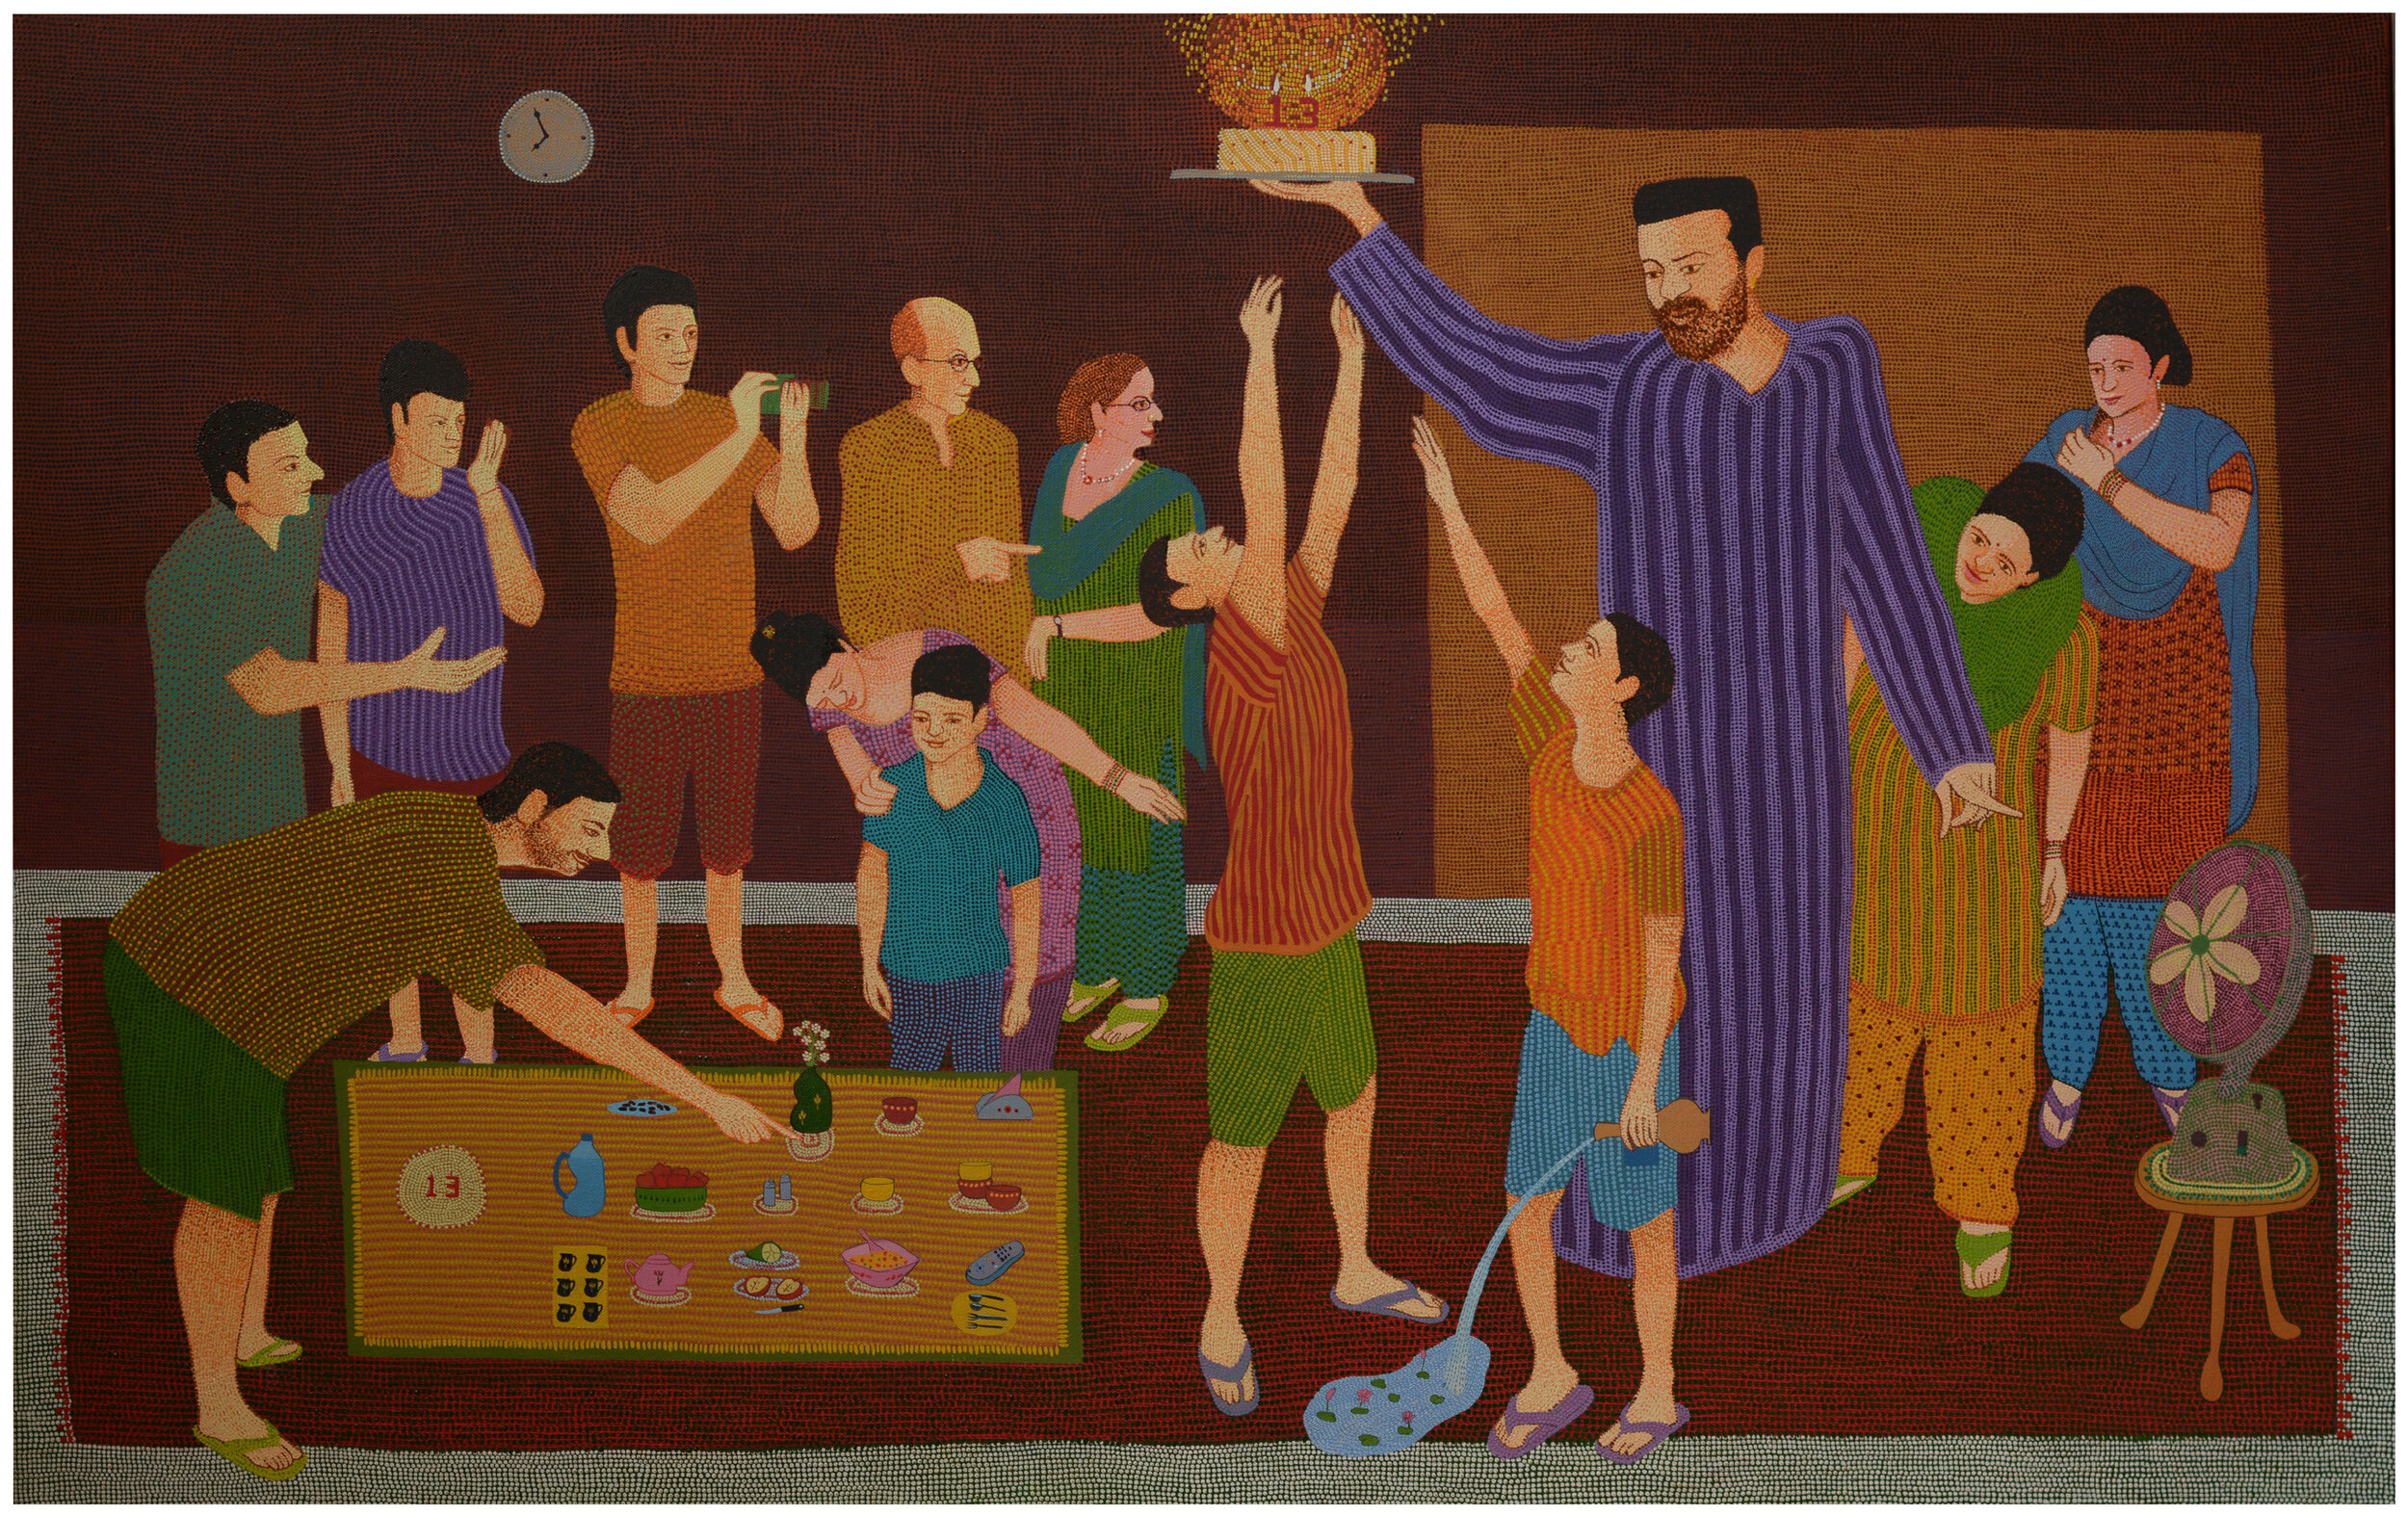 2015, Celebrating togetherness, 32x 48 inches.jpg